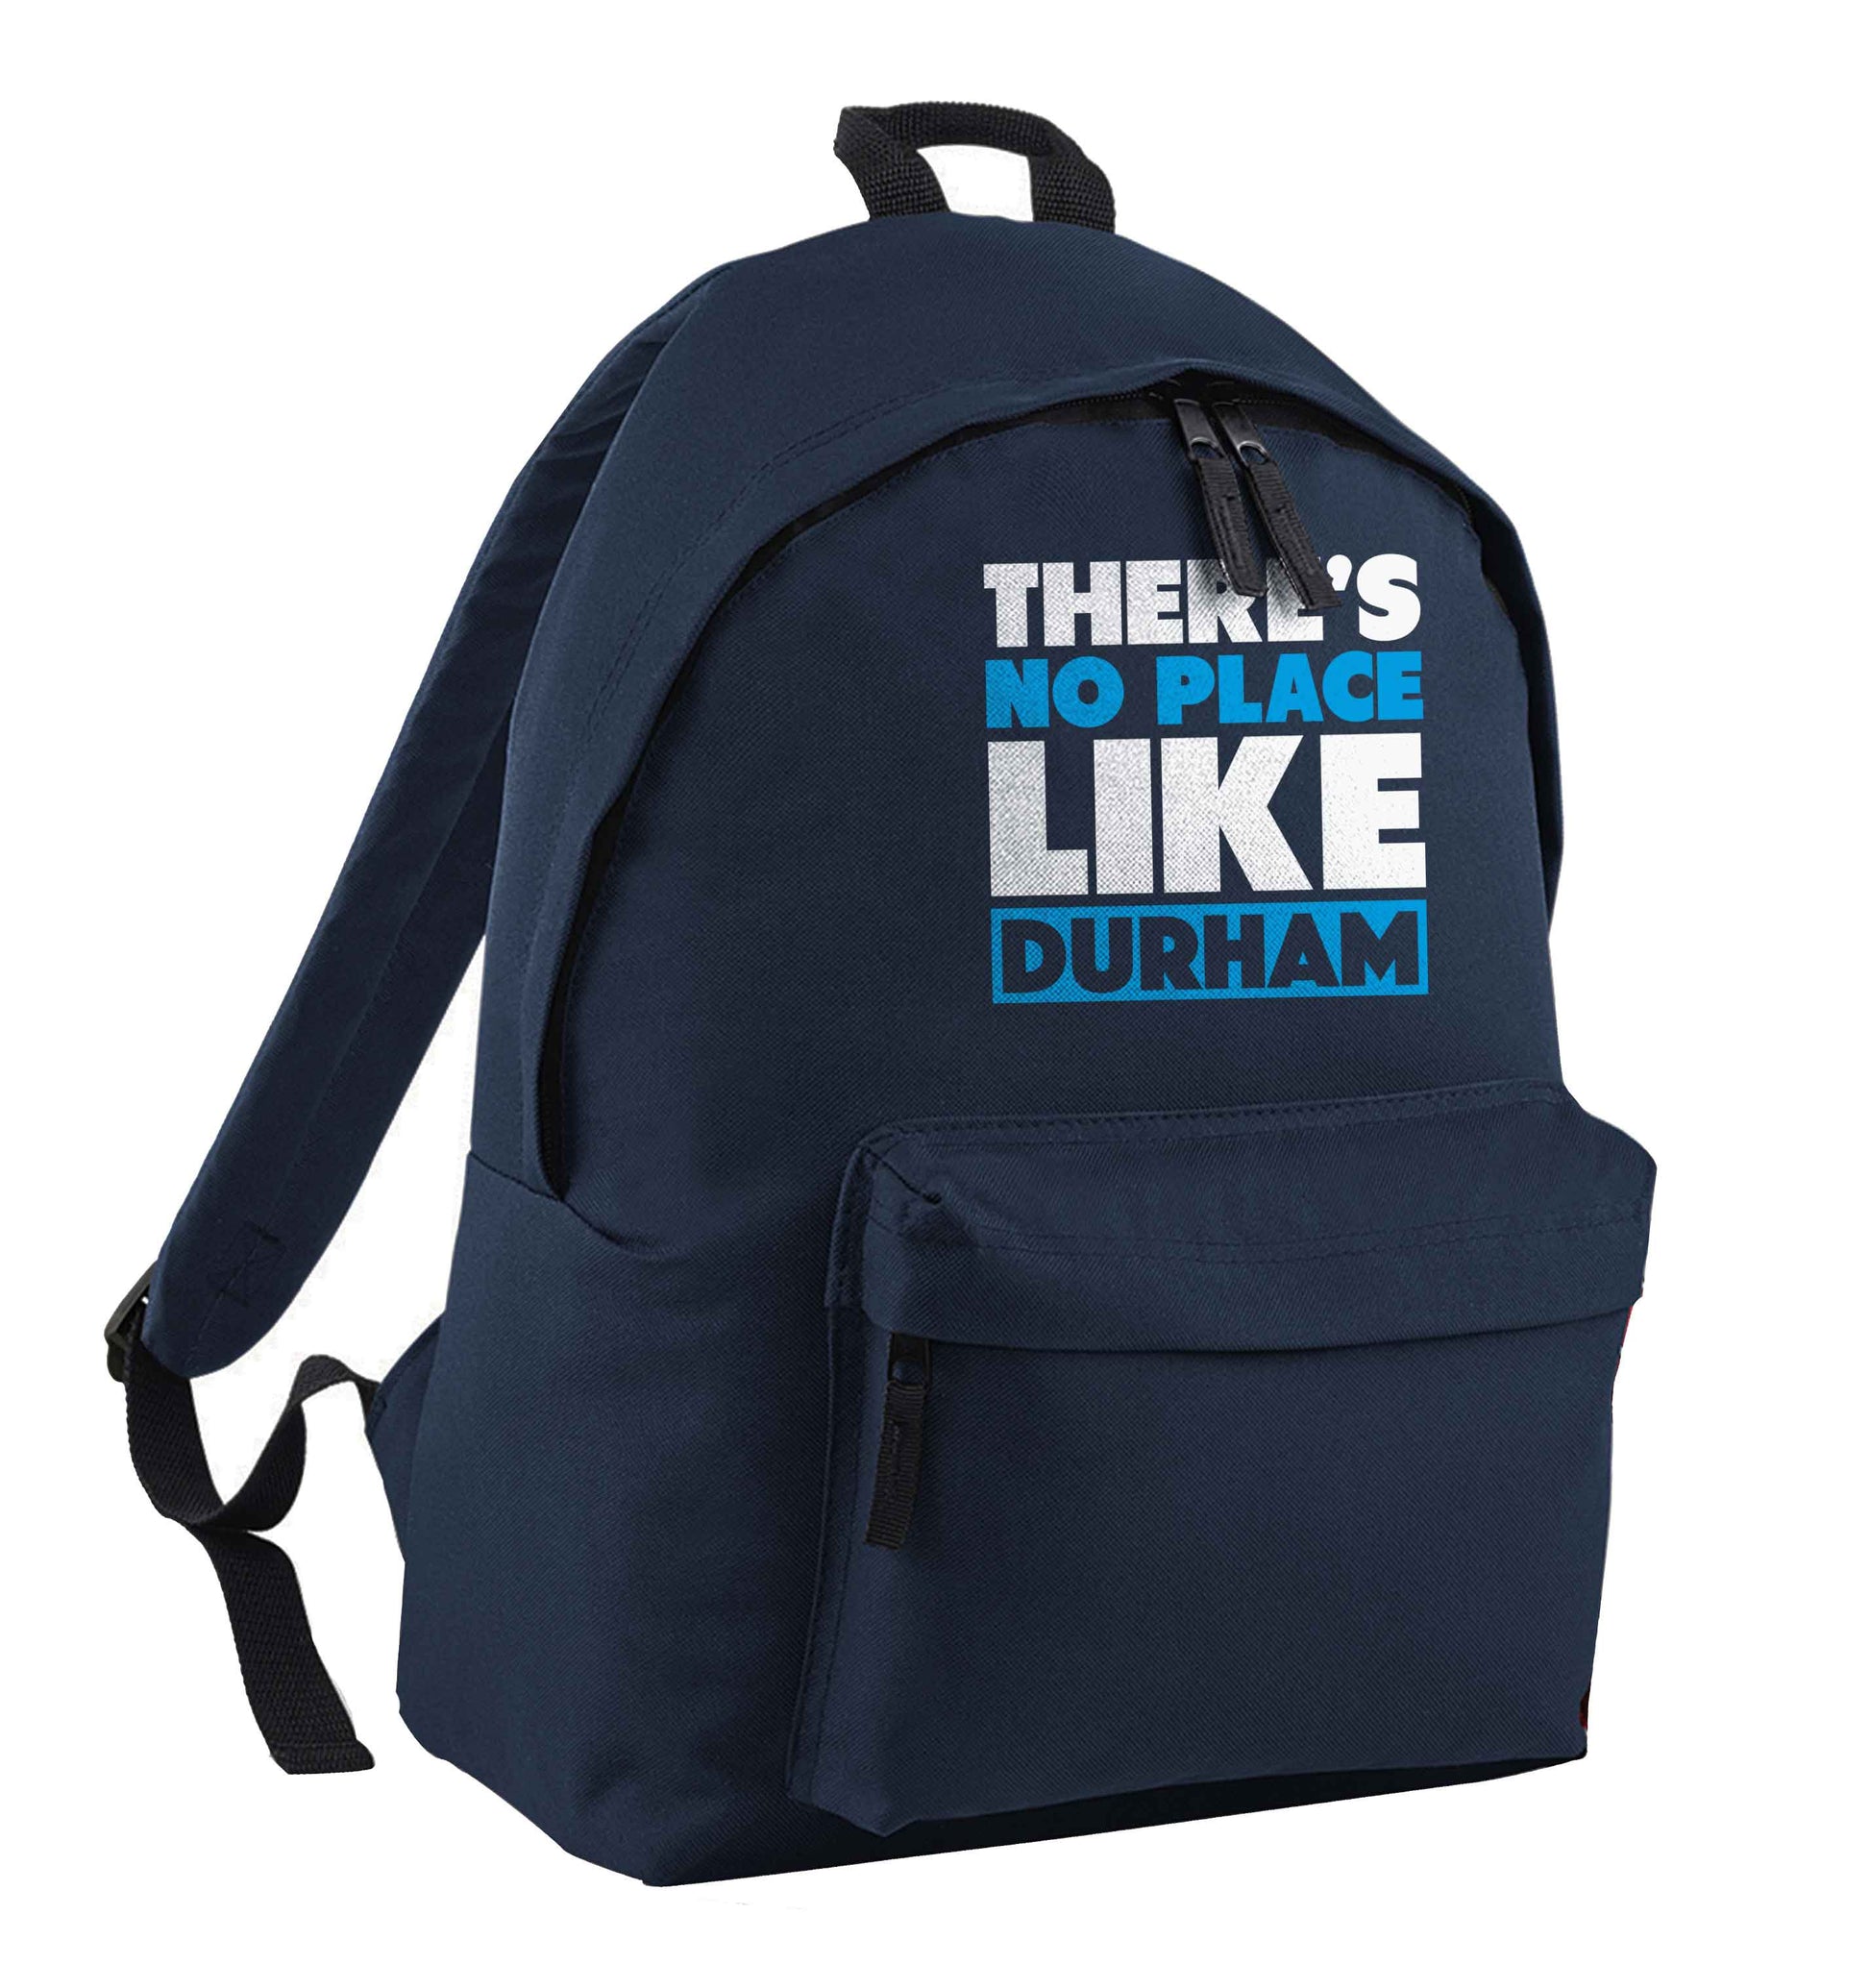 There's no place like Durham navy children's backpack